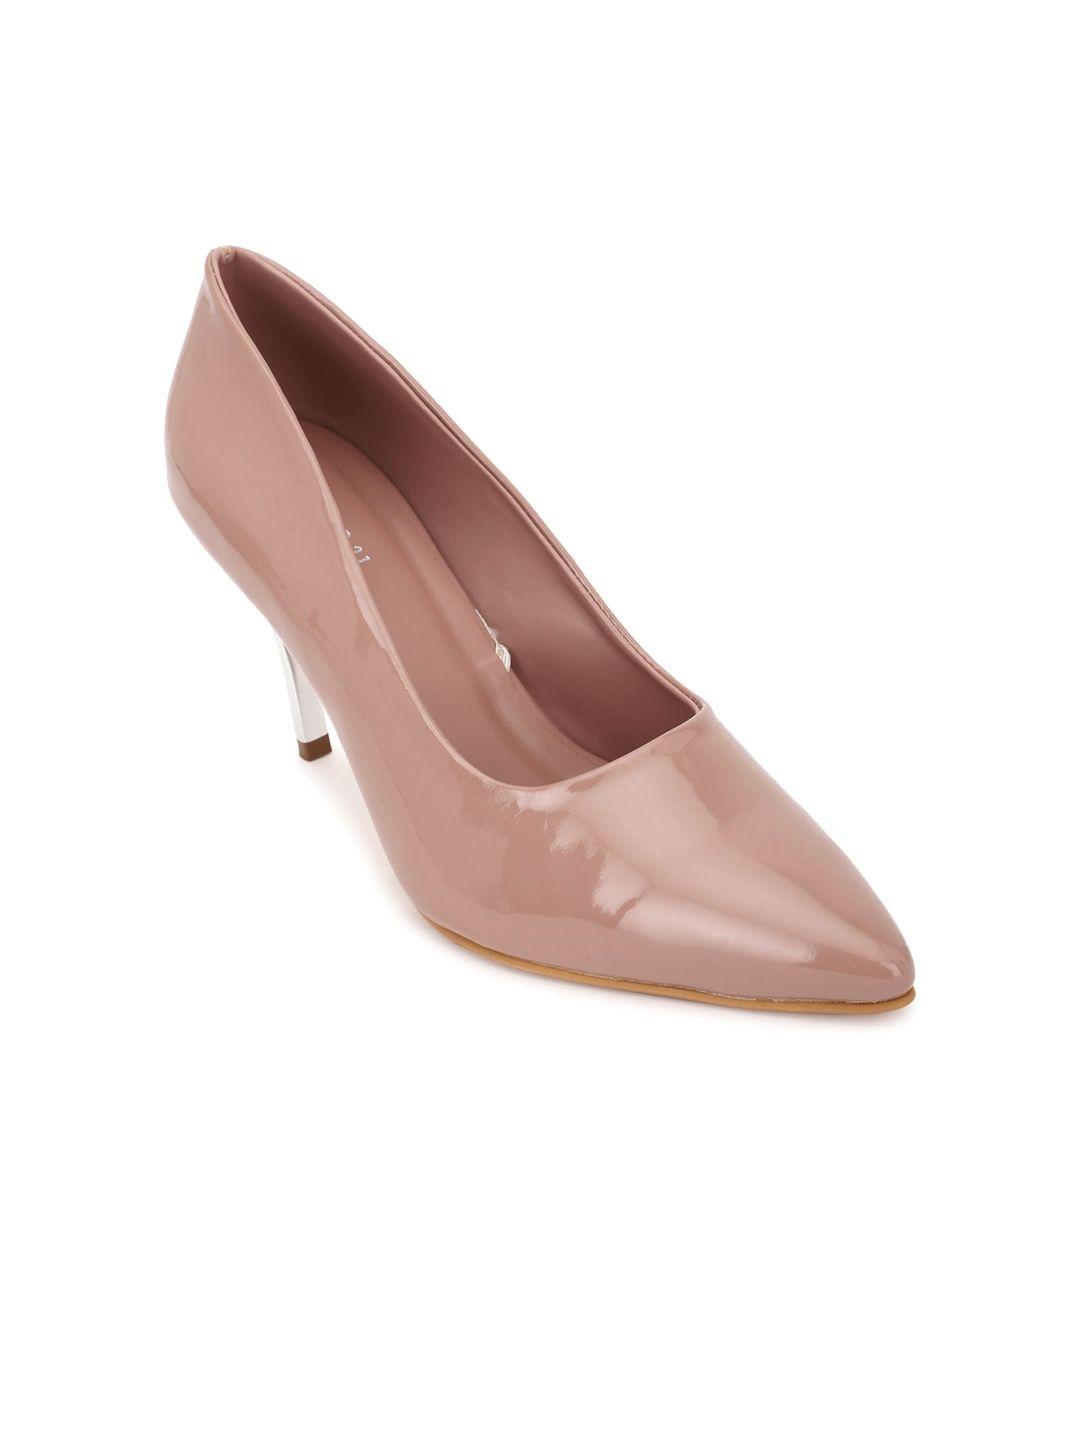 forever-21-brown-pumps